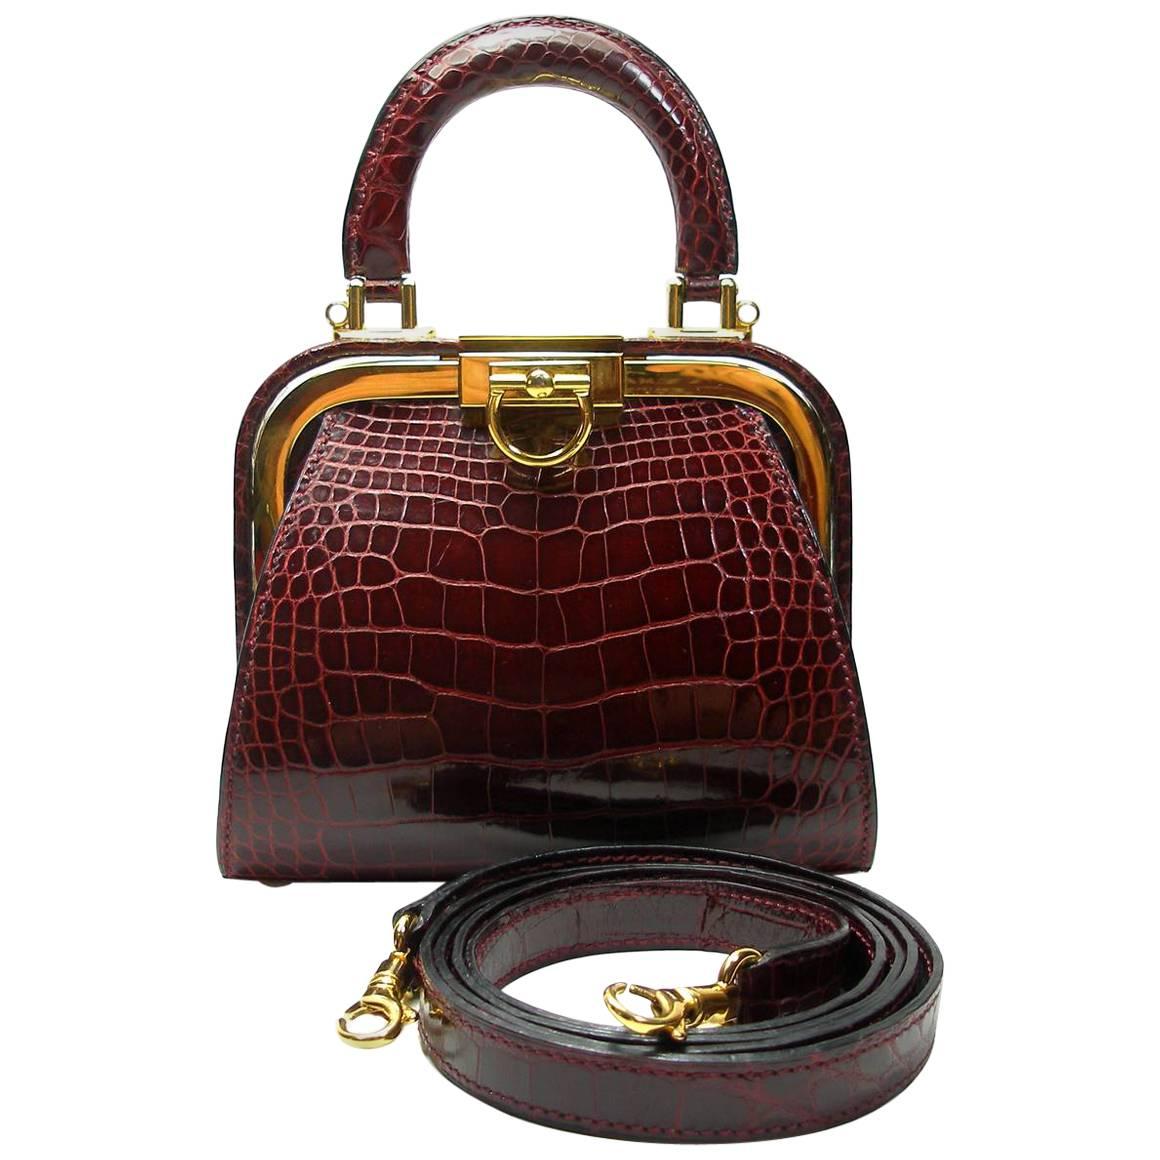 Christian Dior Vintage Rare Doctor Style Micro Handbag in Alligator Leather For Sale